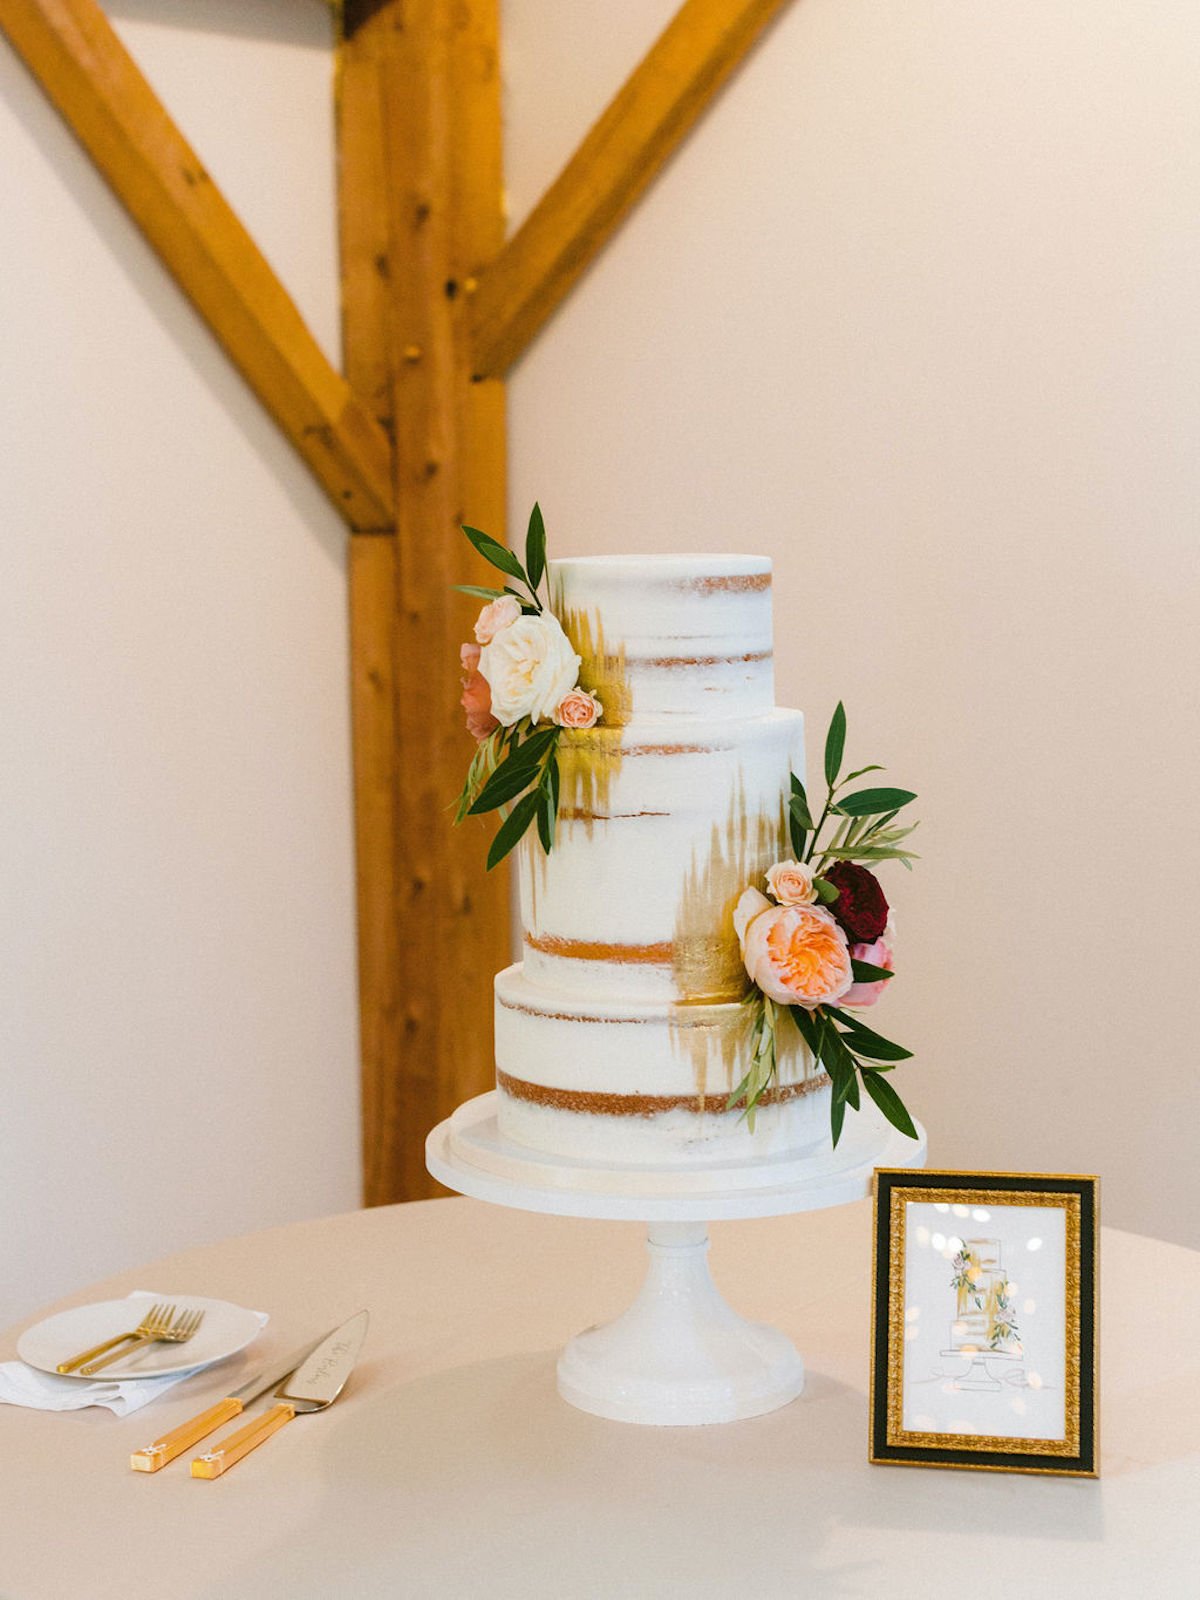 Cake with floral features on table with sign and cake cutting set